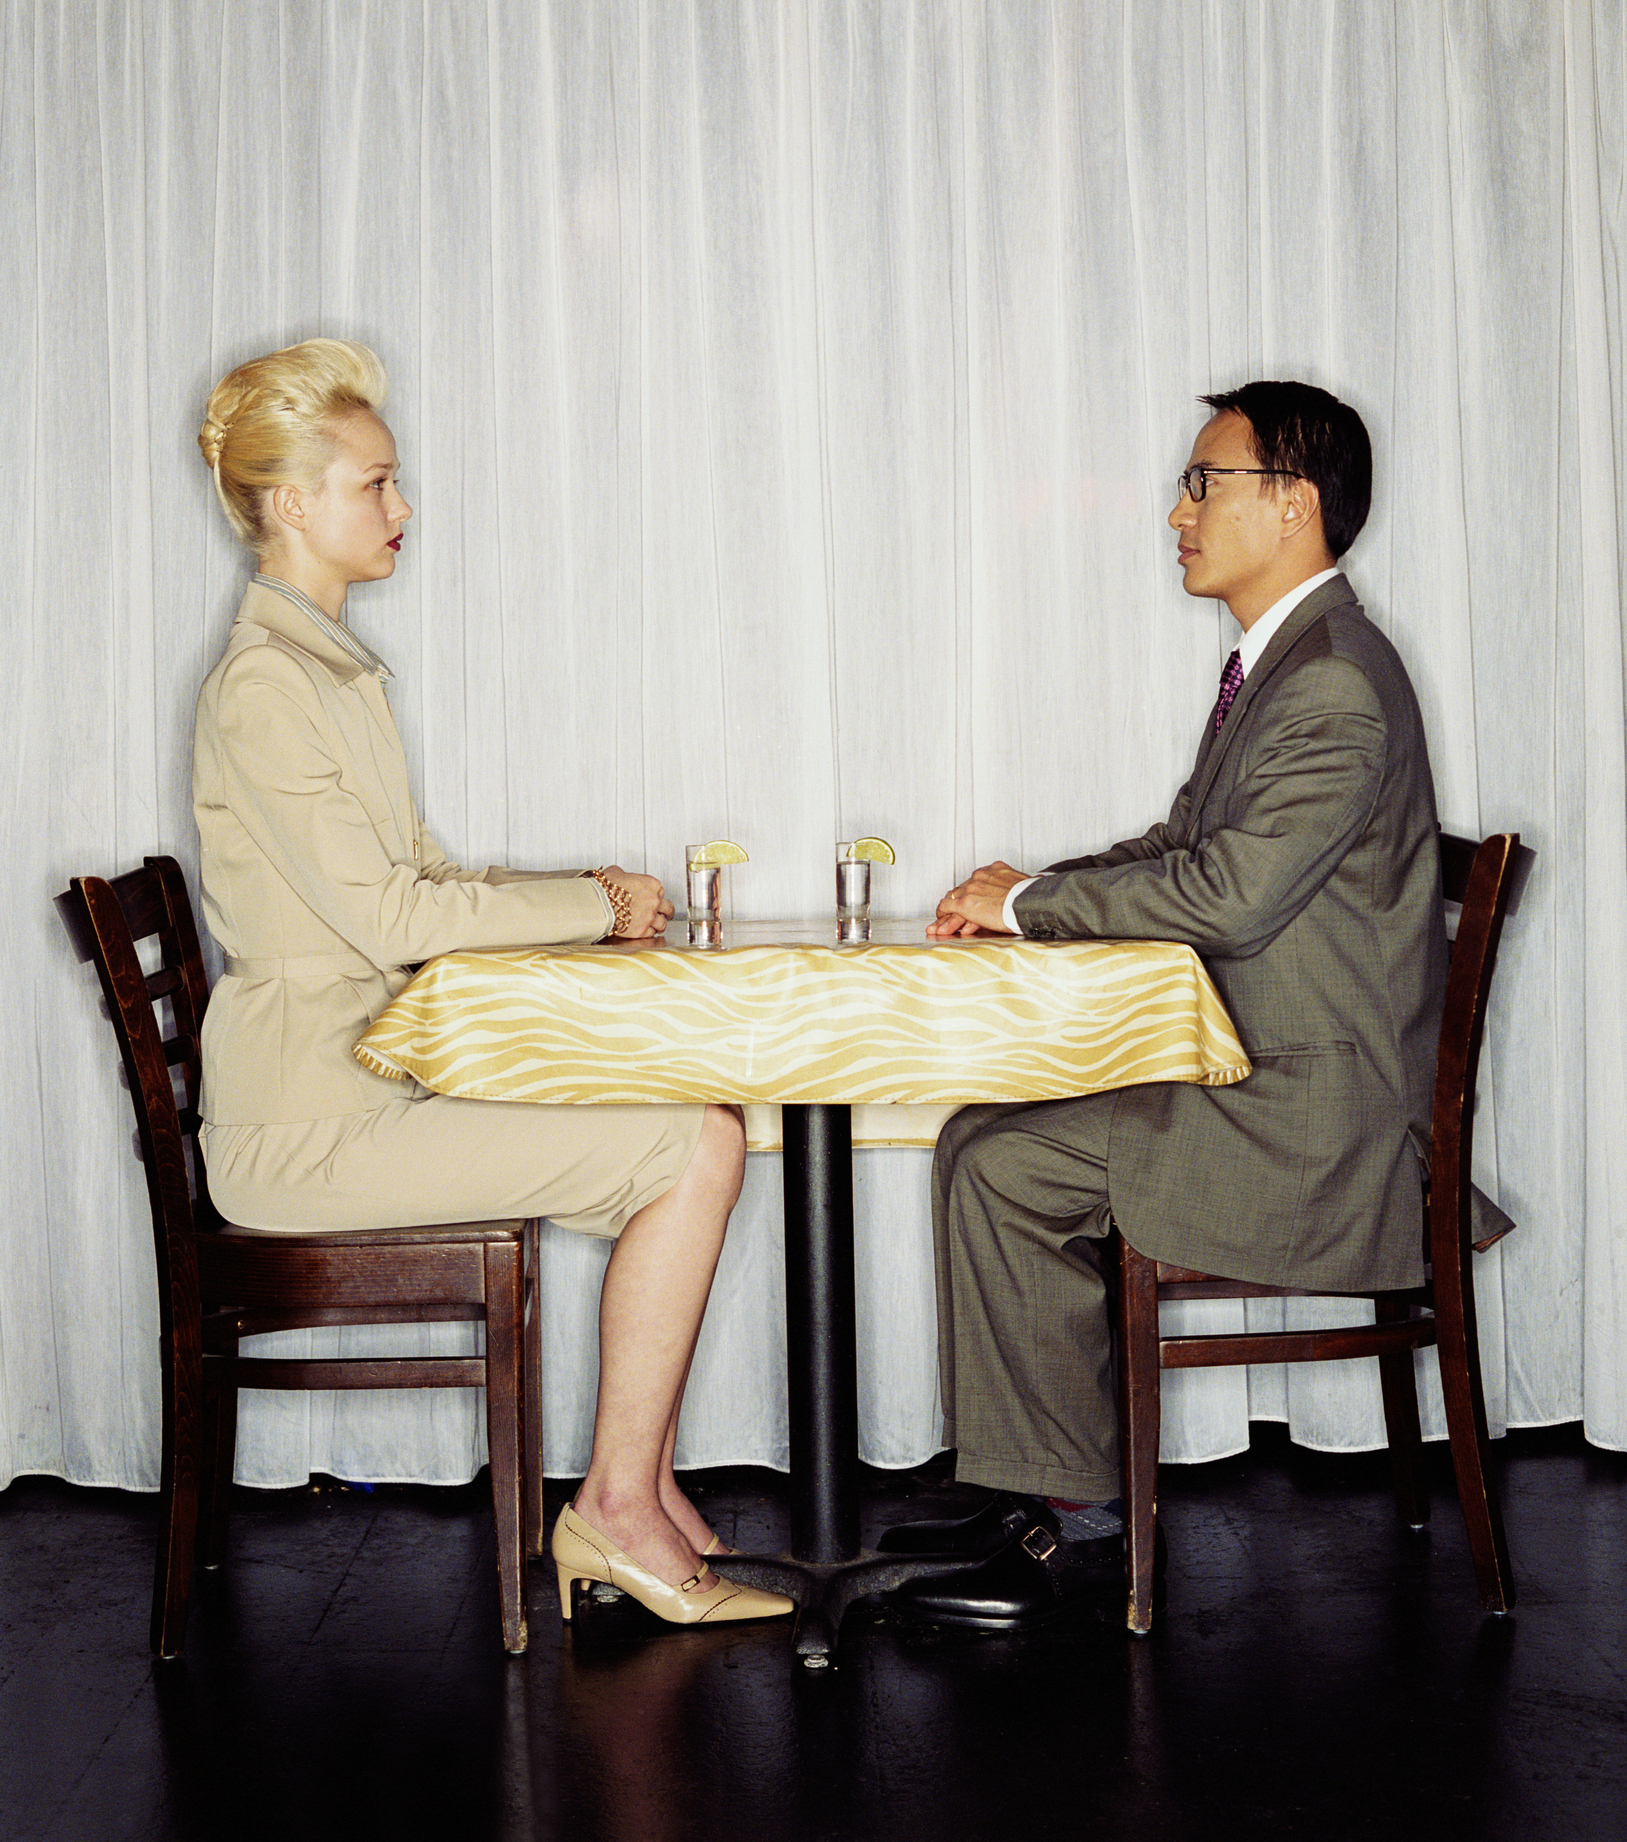 Two people sitting across a table with glasses of water, appearing to have a conversation